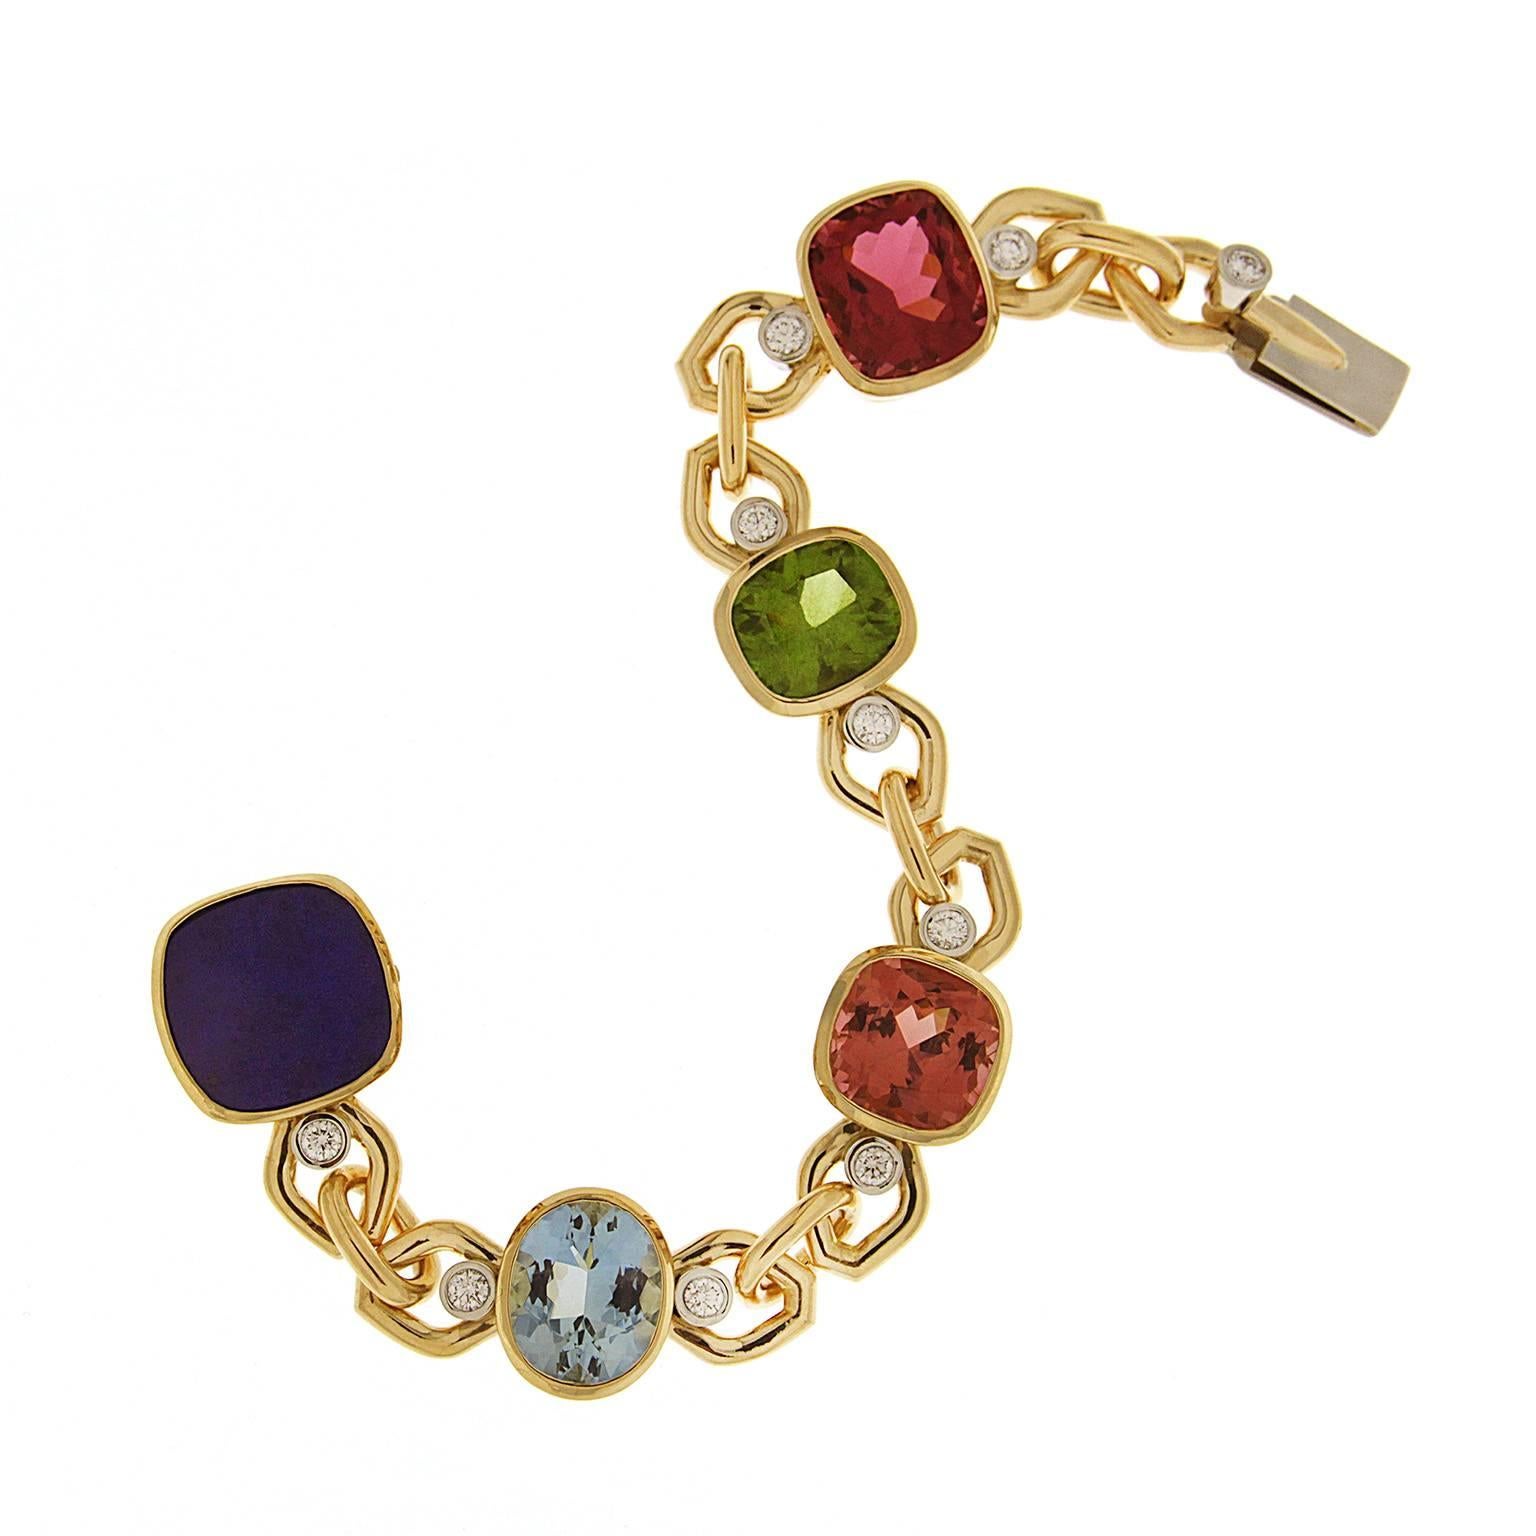 This unique multi color stone bracelet has an oval shape Aquamarine, cushion Lapis Lazuli, Cushion Pink and Brown Tourmalines and a cushion Peridot connected with bezel set diamond links in 18kt yellow gold. 
